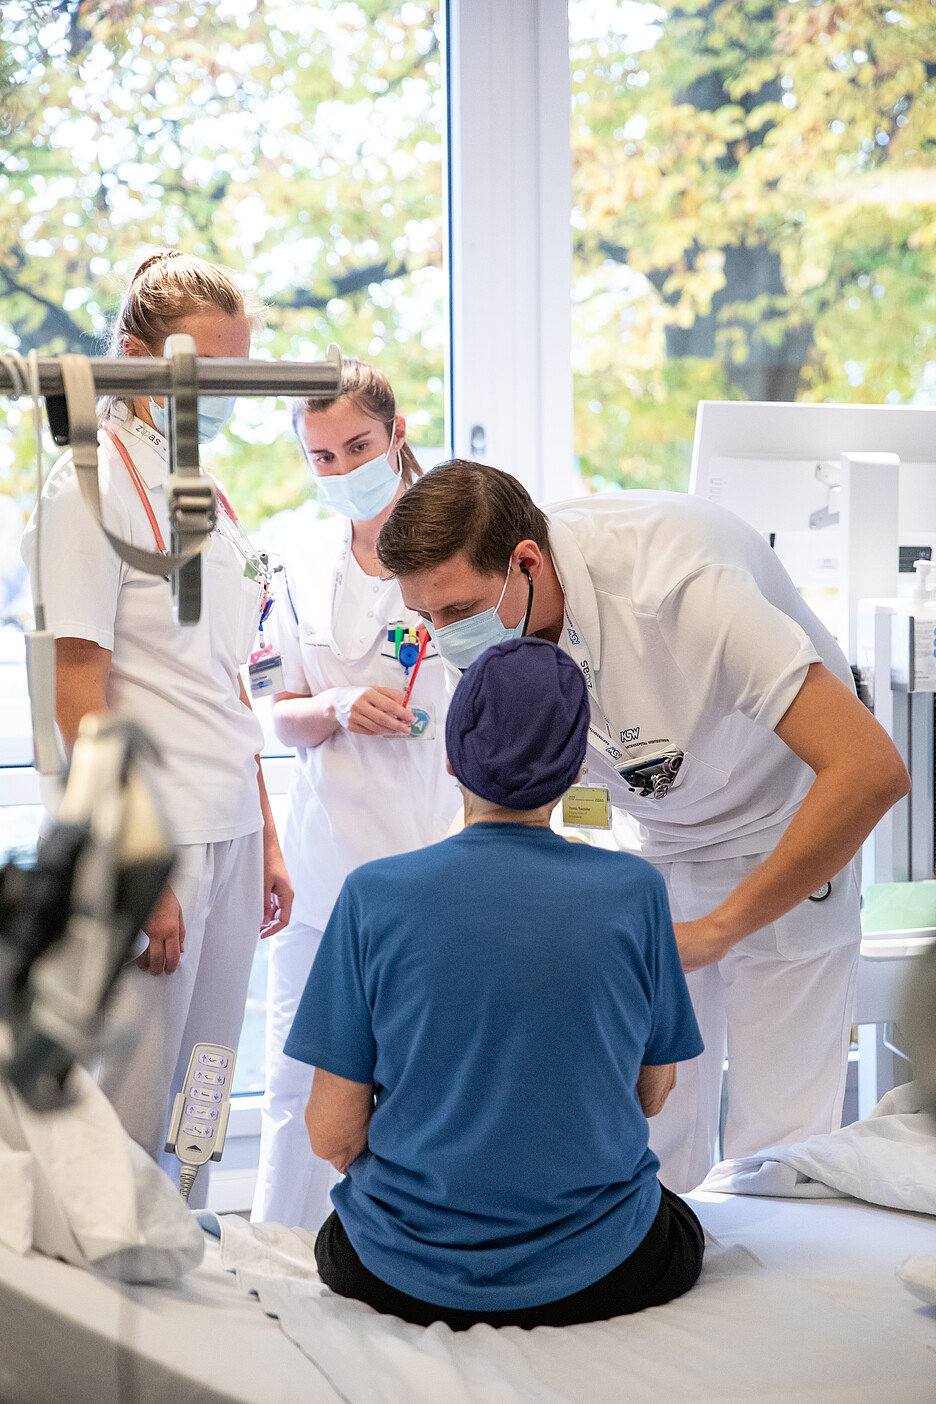 Working together at the patient’s bedside: On the ZIPAS interprofessional training ward at the Cantonal Hospital Winterthur, aspiring health professionals learn from, with and about one another.